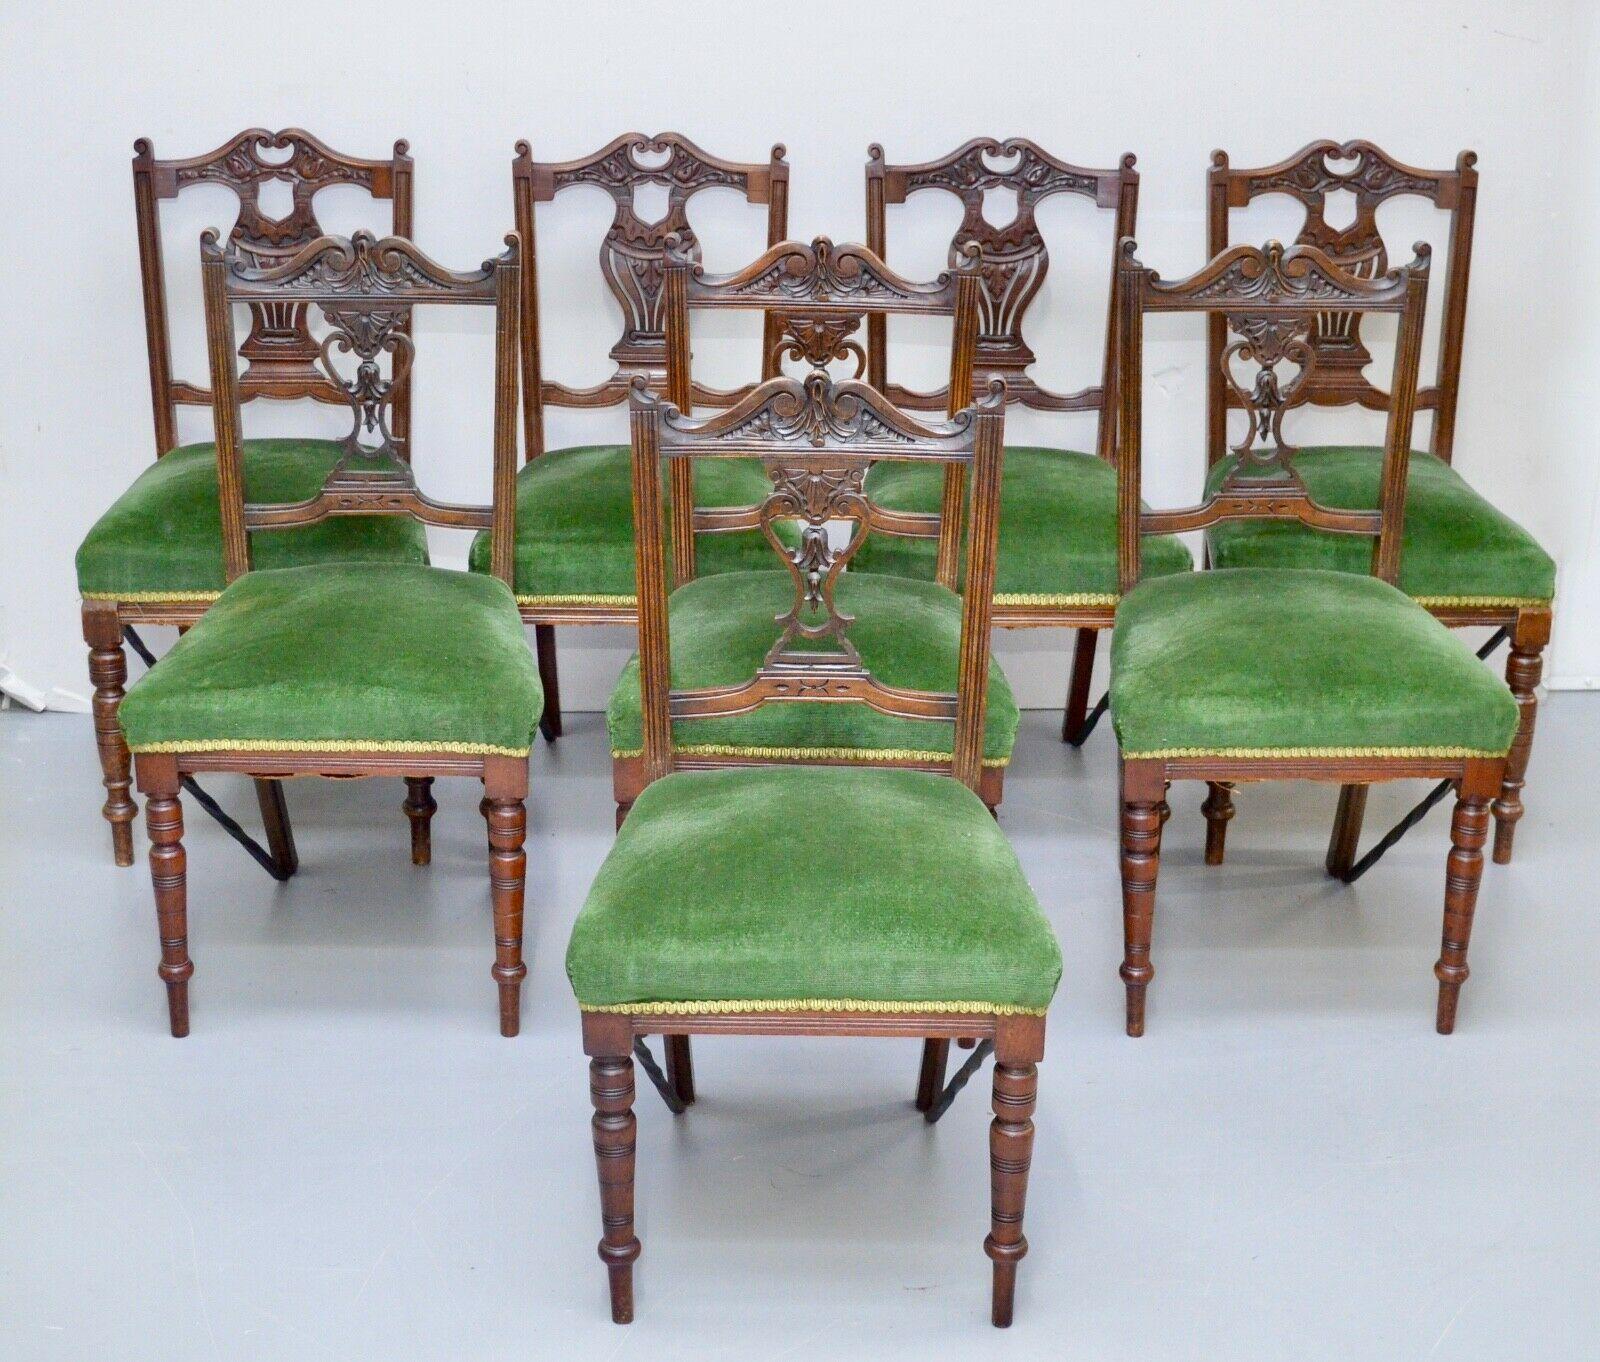 We are delighted to offer for sale this suite of eight Edwardian carved walnut dining chairs with pierced splat backs and upholstered in green velvet.
A beautiful set of solid chairs they all appear to be in good condition, they are fitted 
with